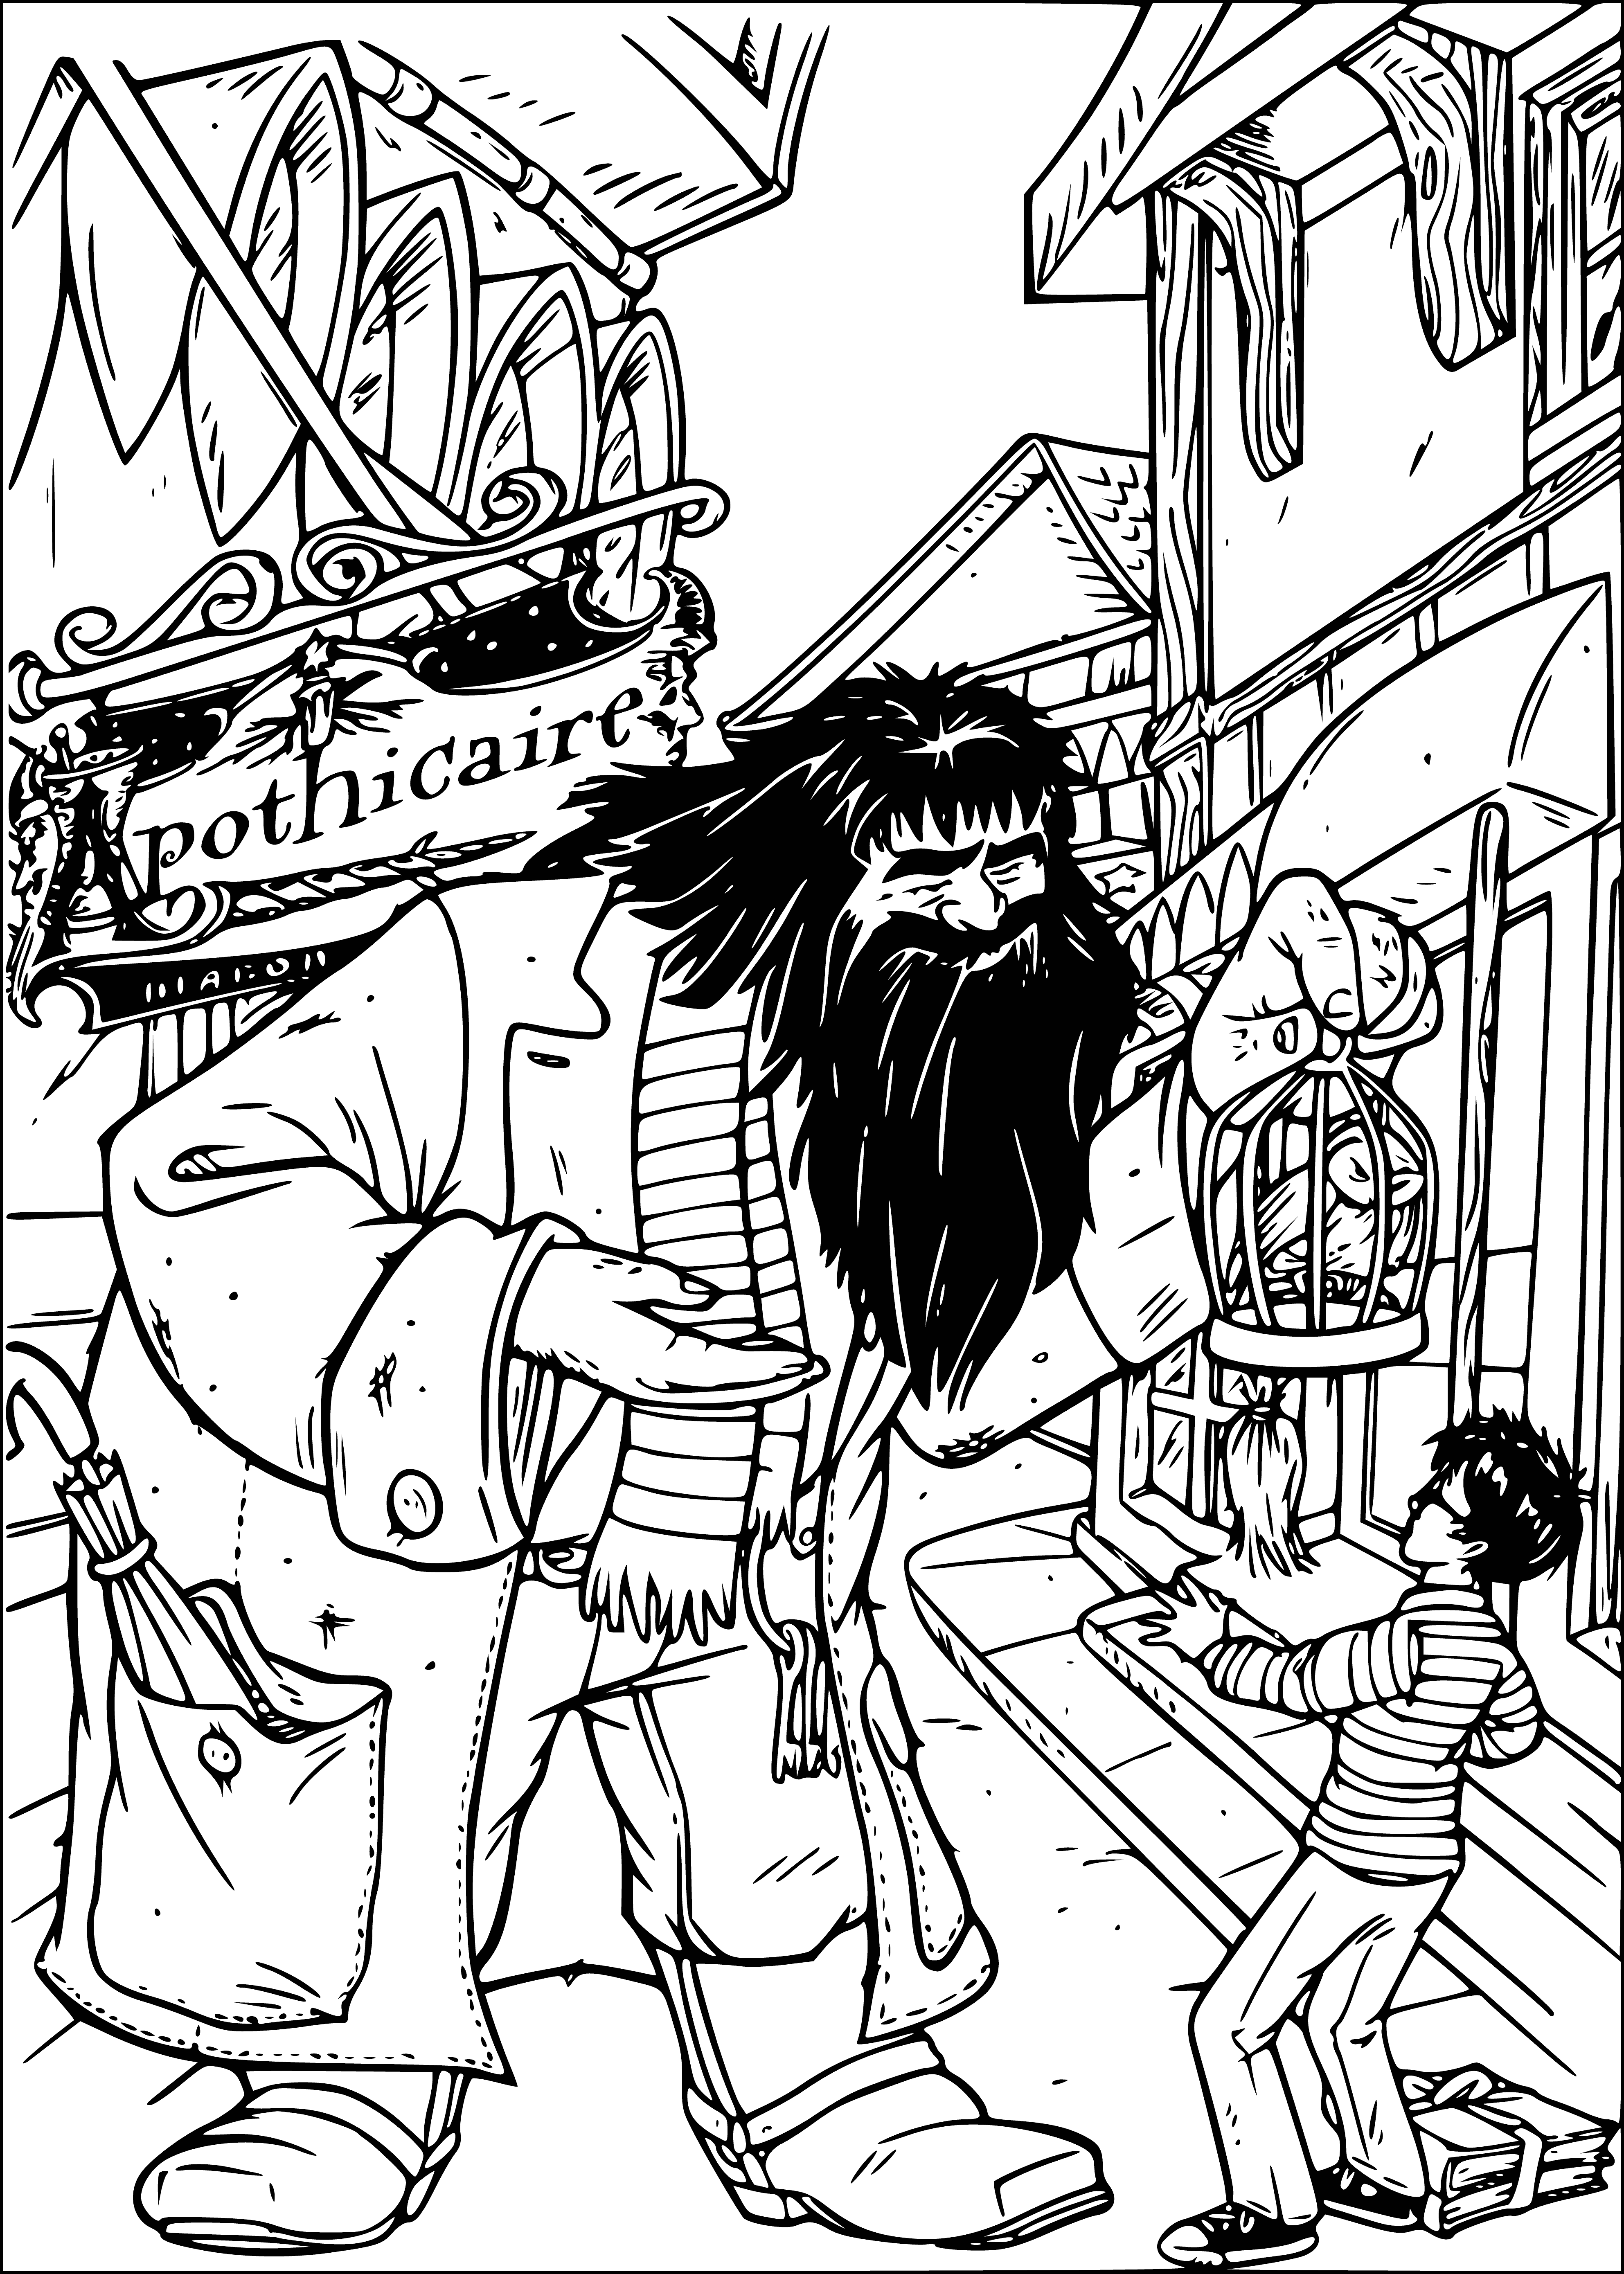 coloring page: Hagrid sighs, looking tired, shoulders sagging - resting chin on his hand.